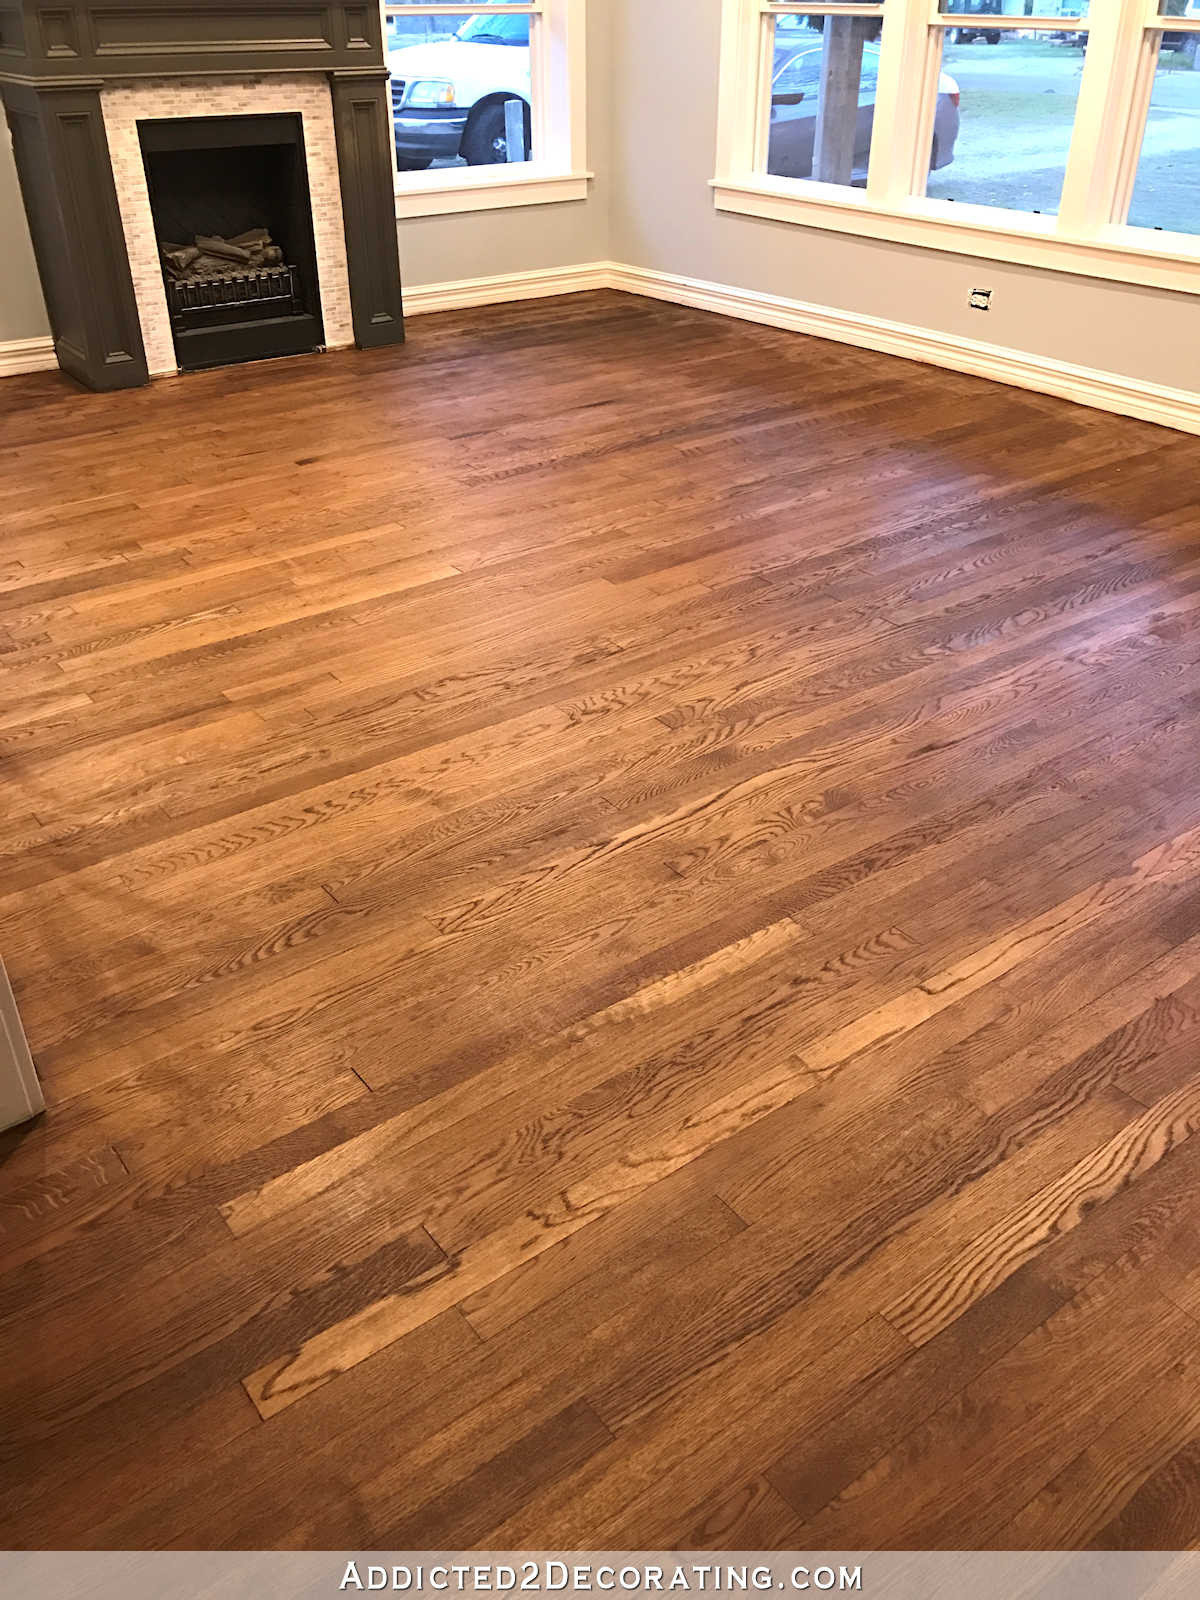 25 attractive top Hardwood Floor Colors 2017 2022 free download top hardwood floor colors 2017 of adventures in staining my red oak hardwood floors products process with regard to staining red oak hardwood floors 8a living room and entryway